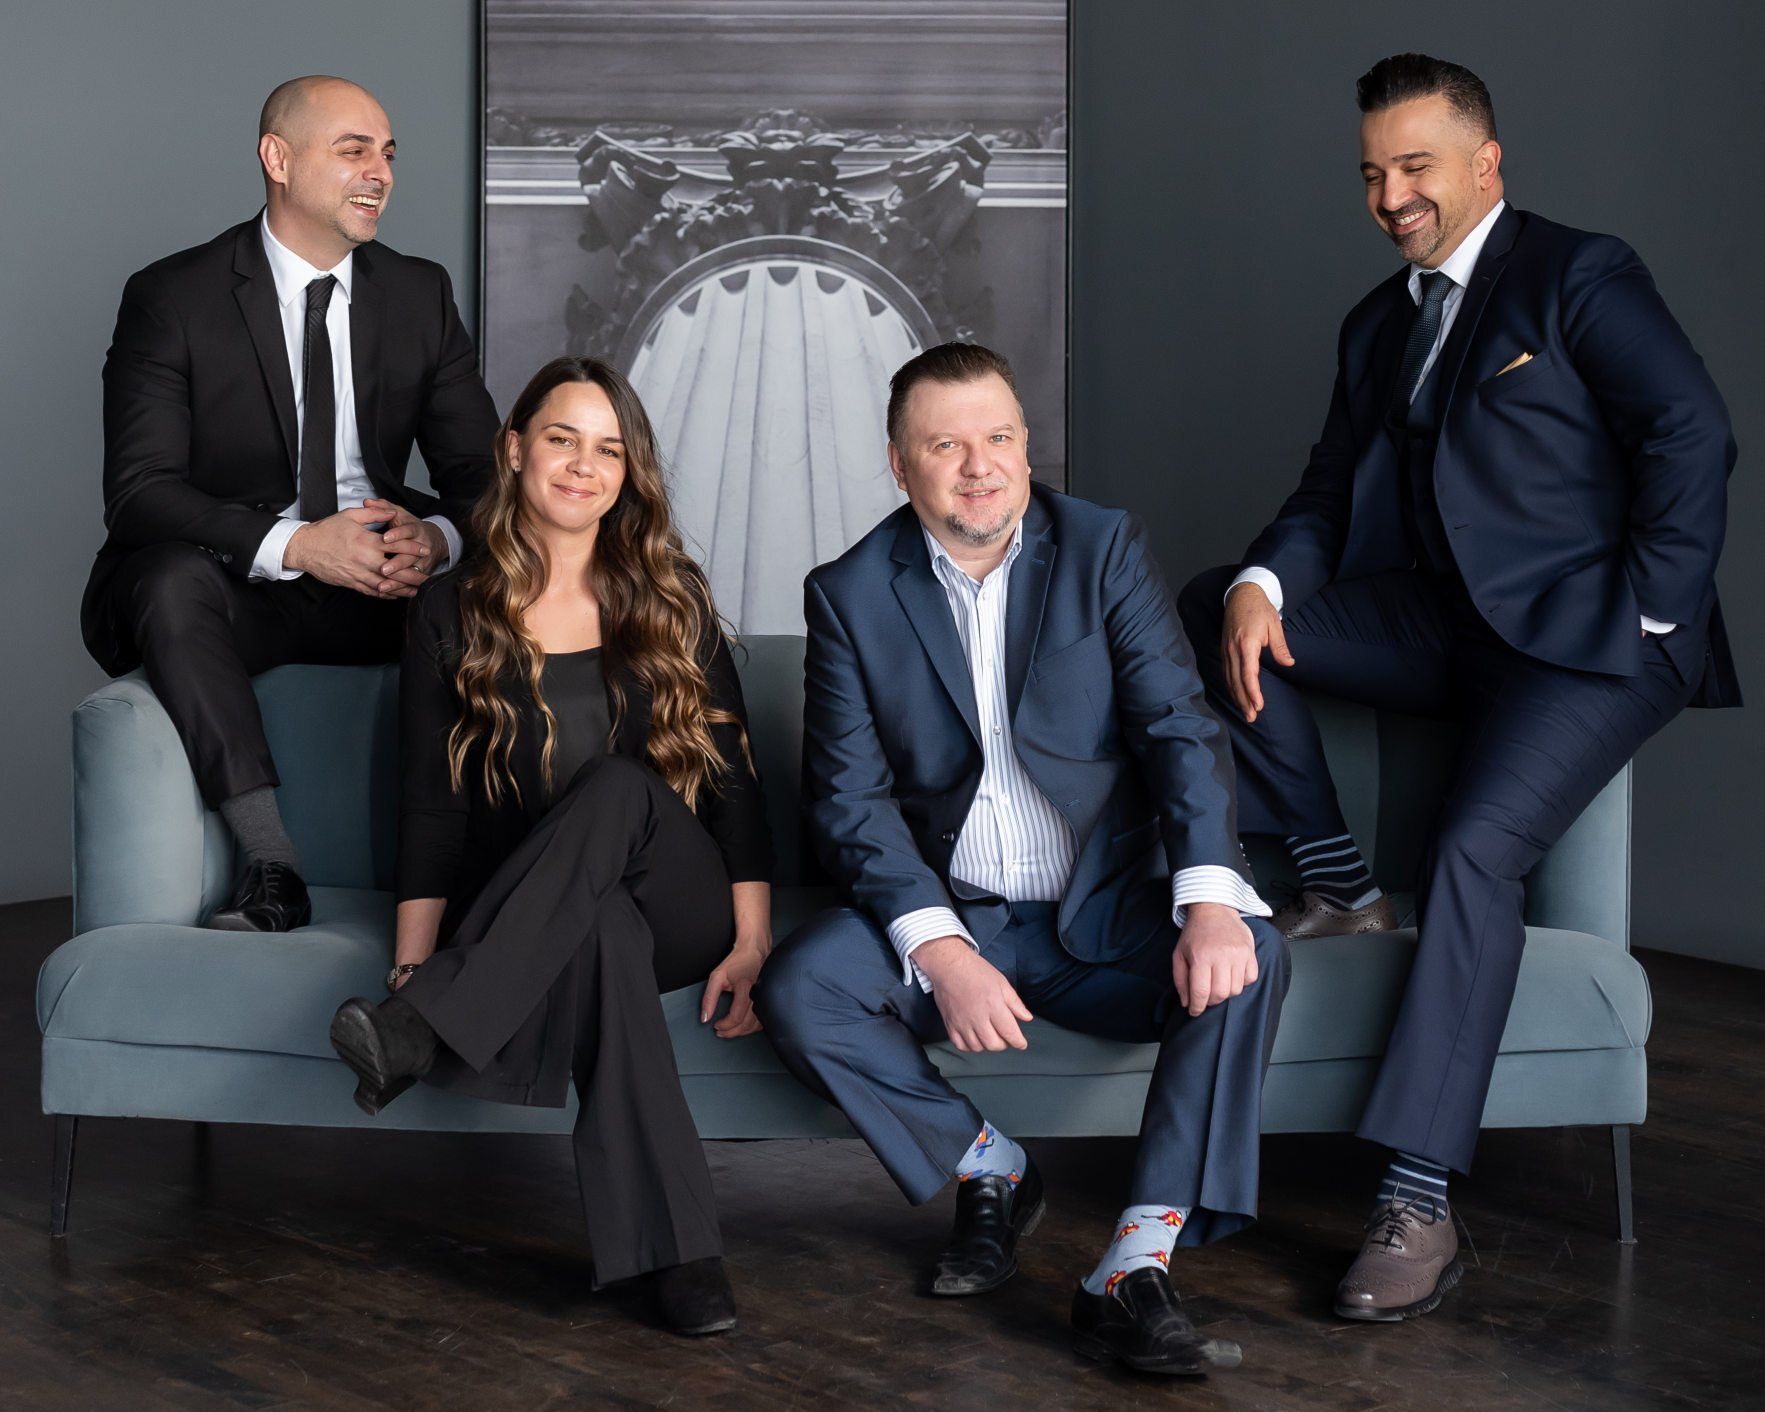 Four smartly  dressed realtors smiling and sitting on a couch.